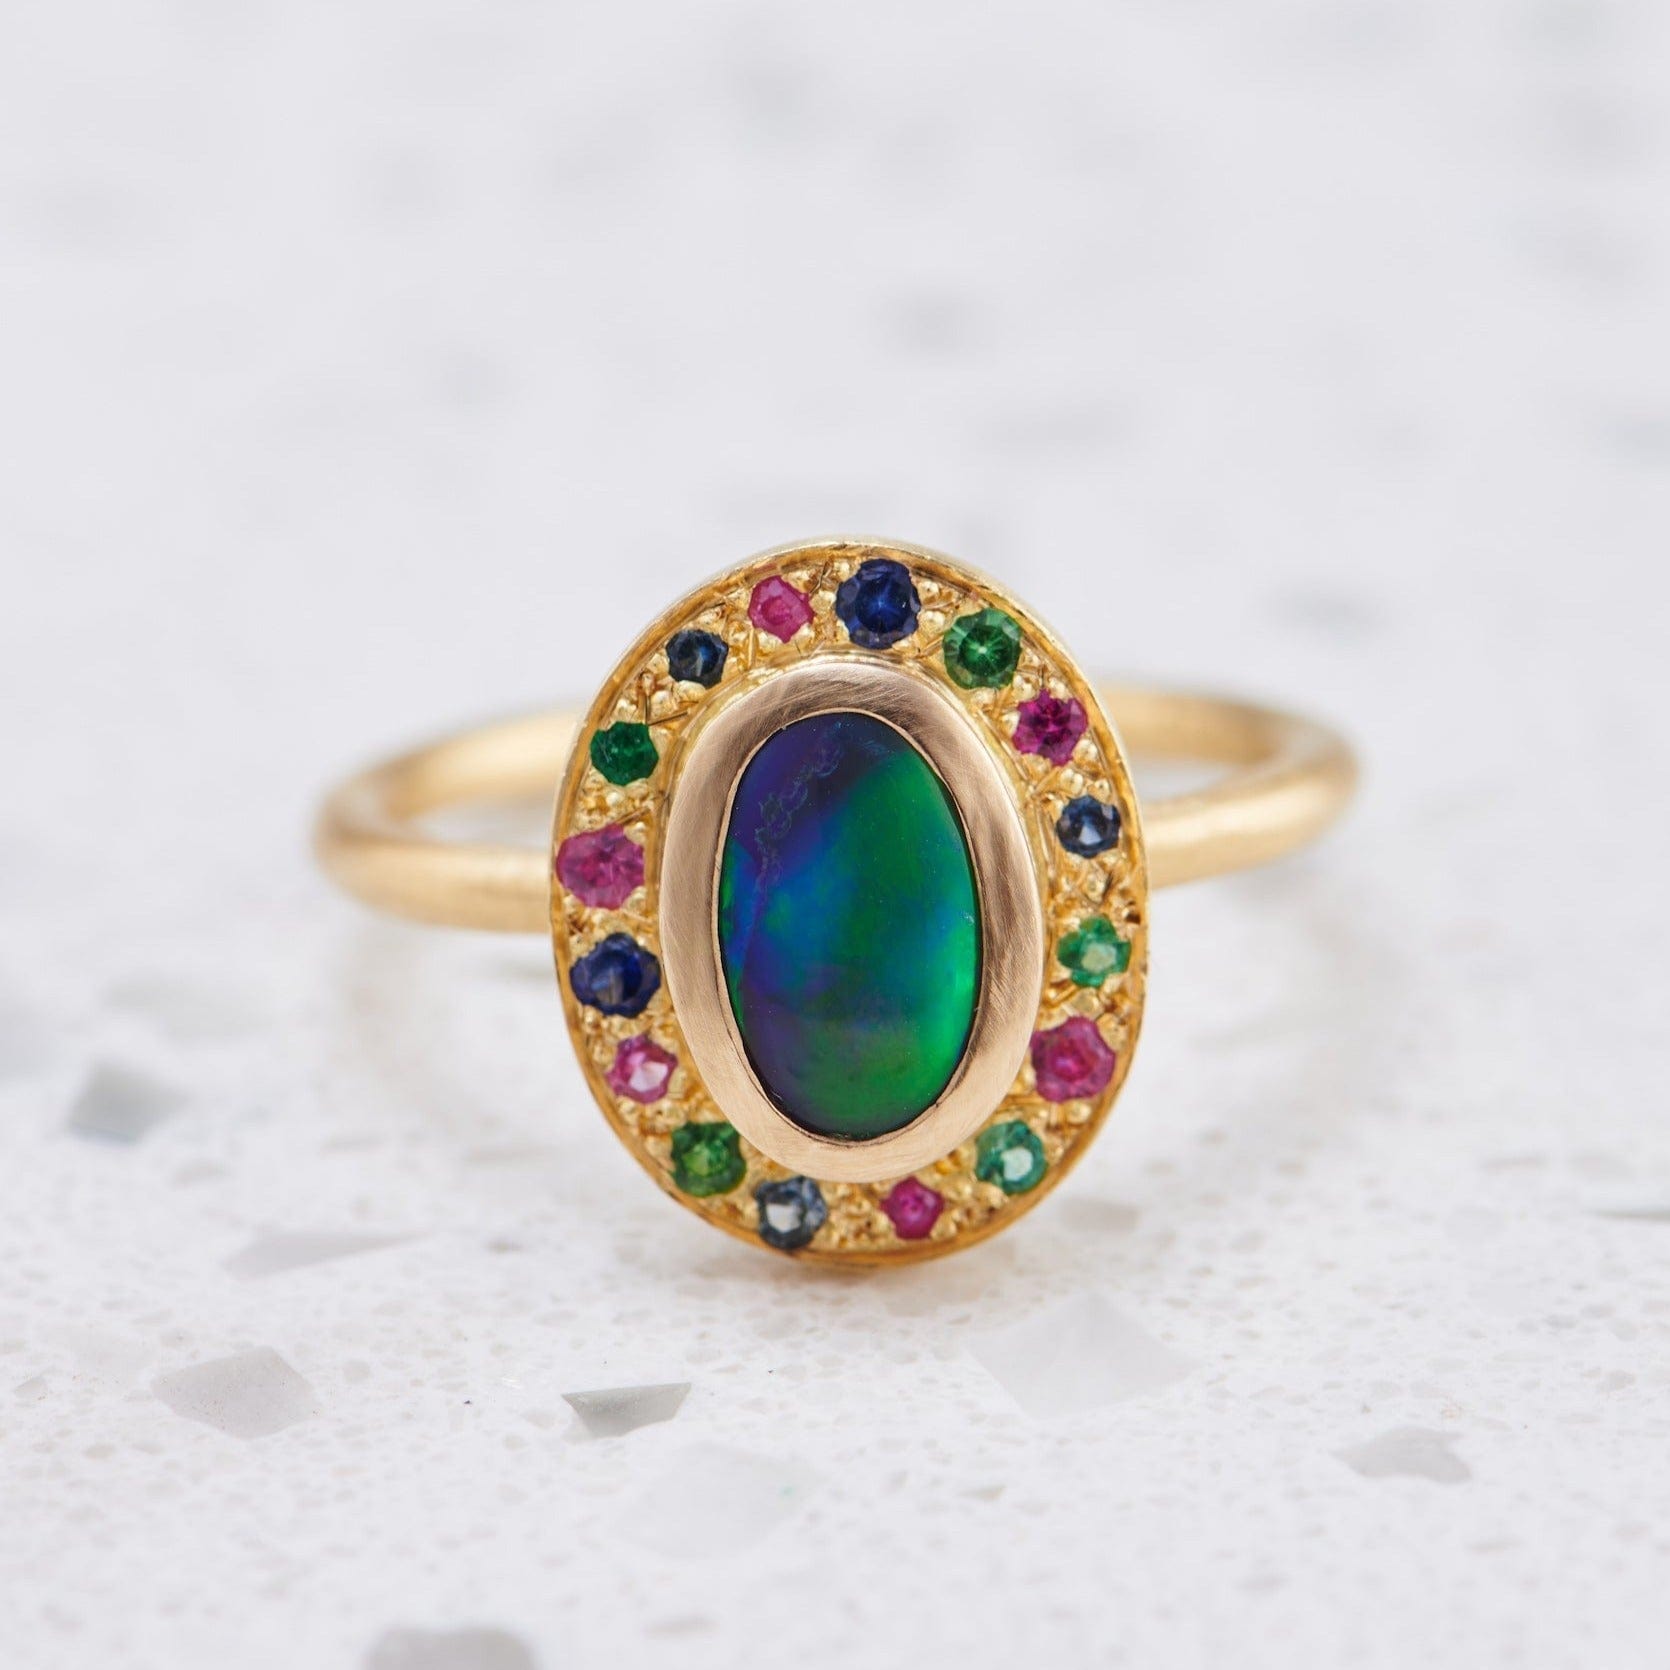 Luxury Promise Lightning Ridge Black Opal with surrounding Emeralds and Sapphires set in 18K Yellow Gold